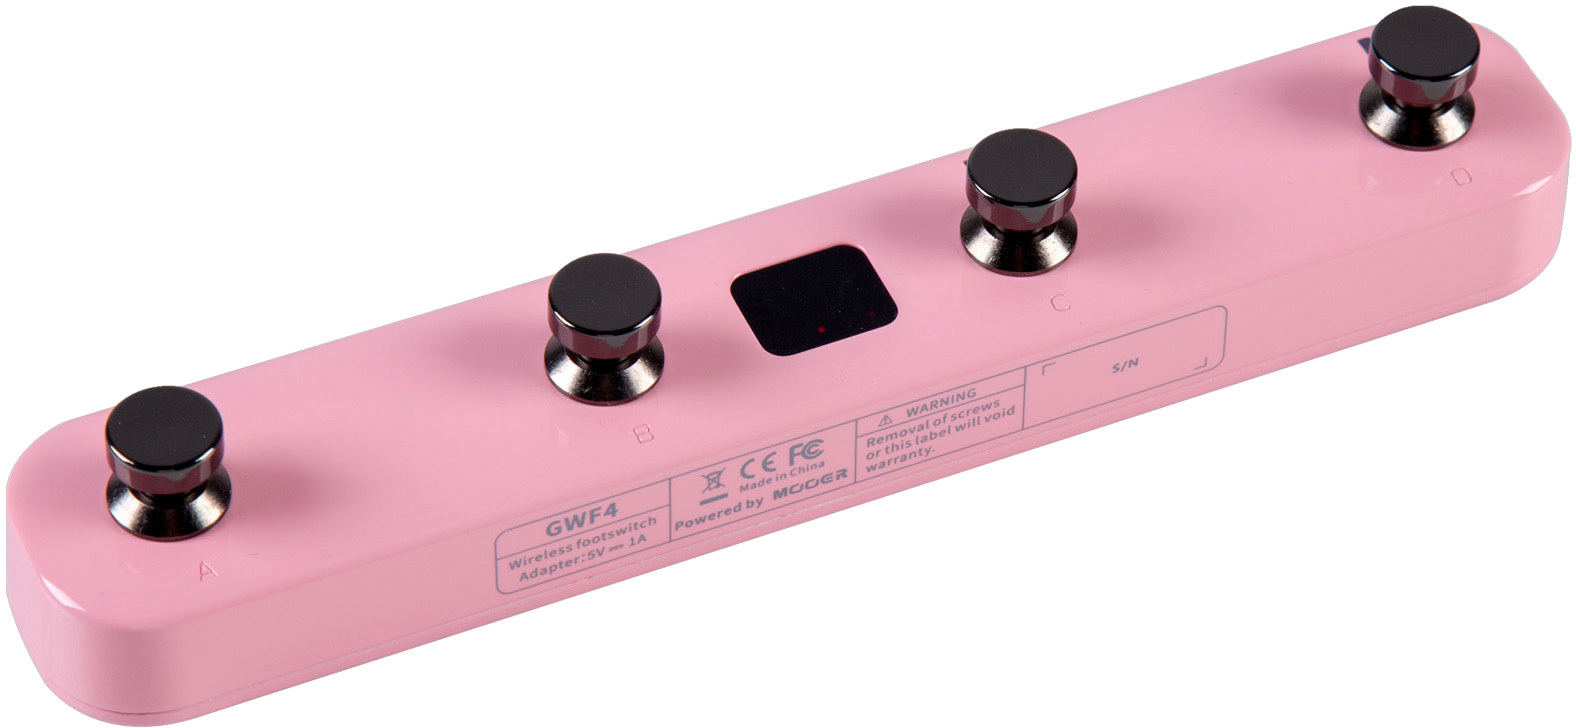 Mooer Gwf4 Gtrs Wireless Footswitch Shell Pink - Pedal de volumen / booster / expresión - Main picture